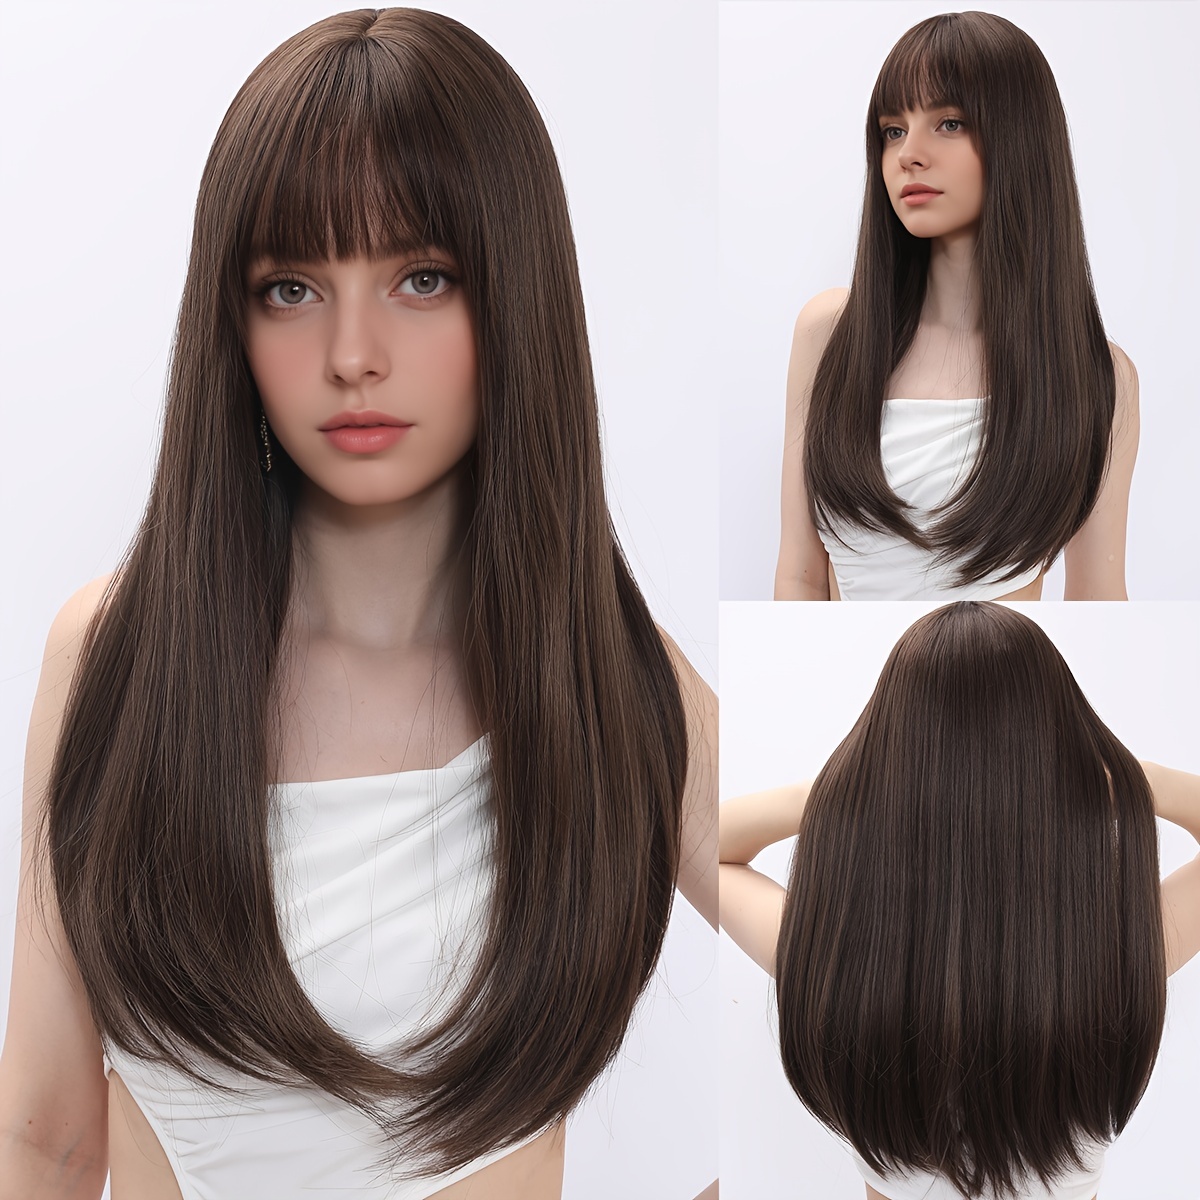 

Elegant Ladies Charm Dark Brown Bangs Wig - Heat Resistant, Easy To Shape, Natural And Full, With A Comfortable Rose Mesh Hat, Suitable For Daily And Various Activities (24 Inches)